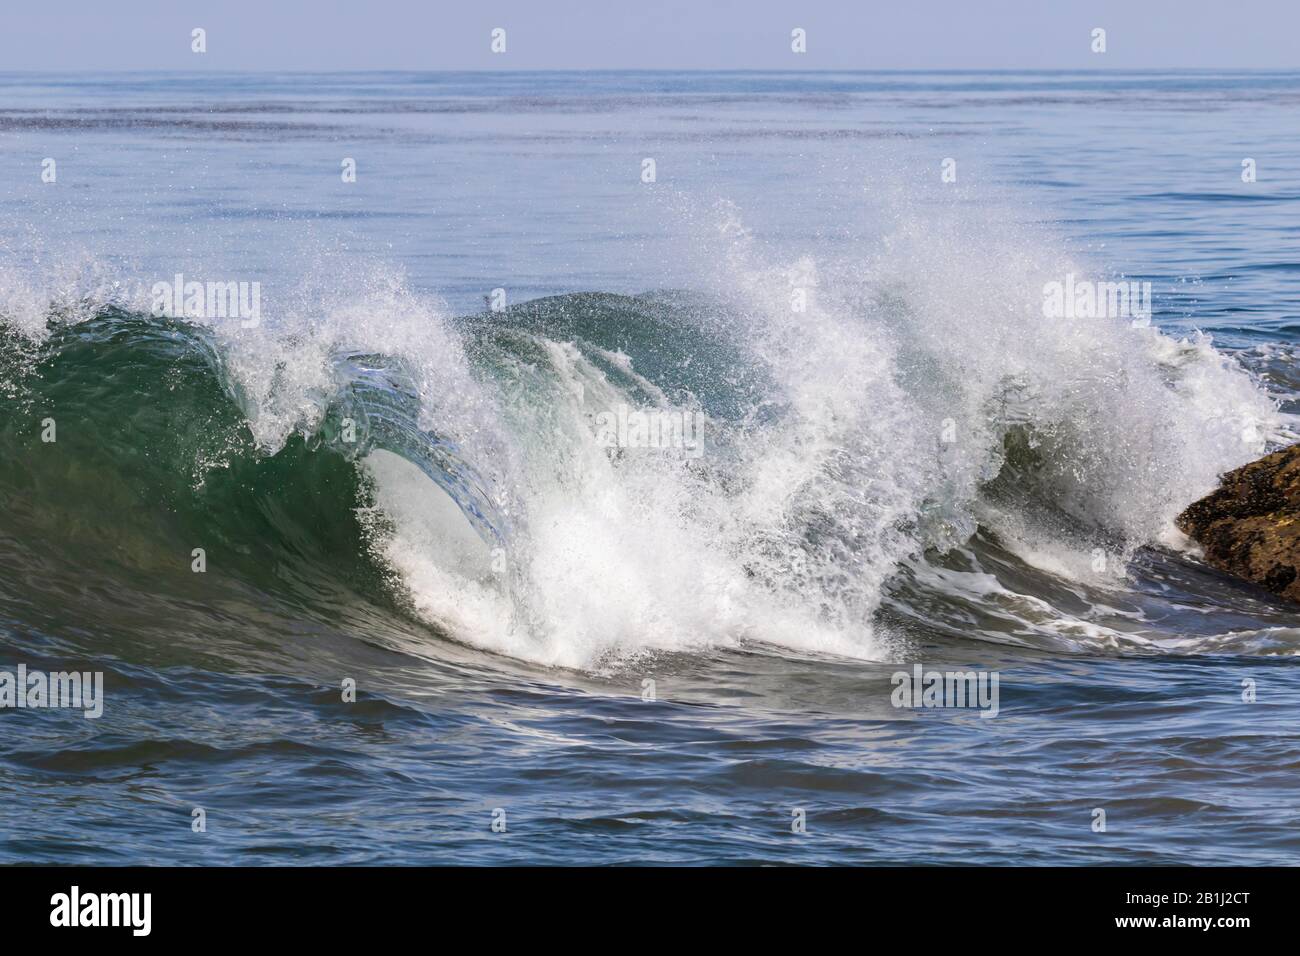 Curling wave at Leo Carrillo State Beach, Malibu, California. Rock nearby; pacific ocean in distance. Stock Photo